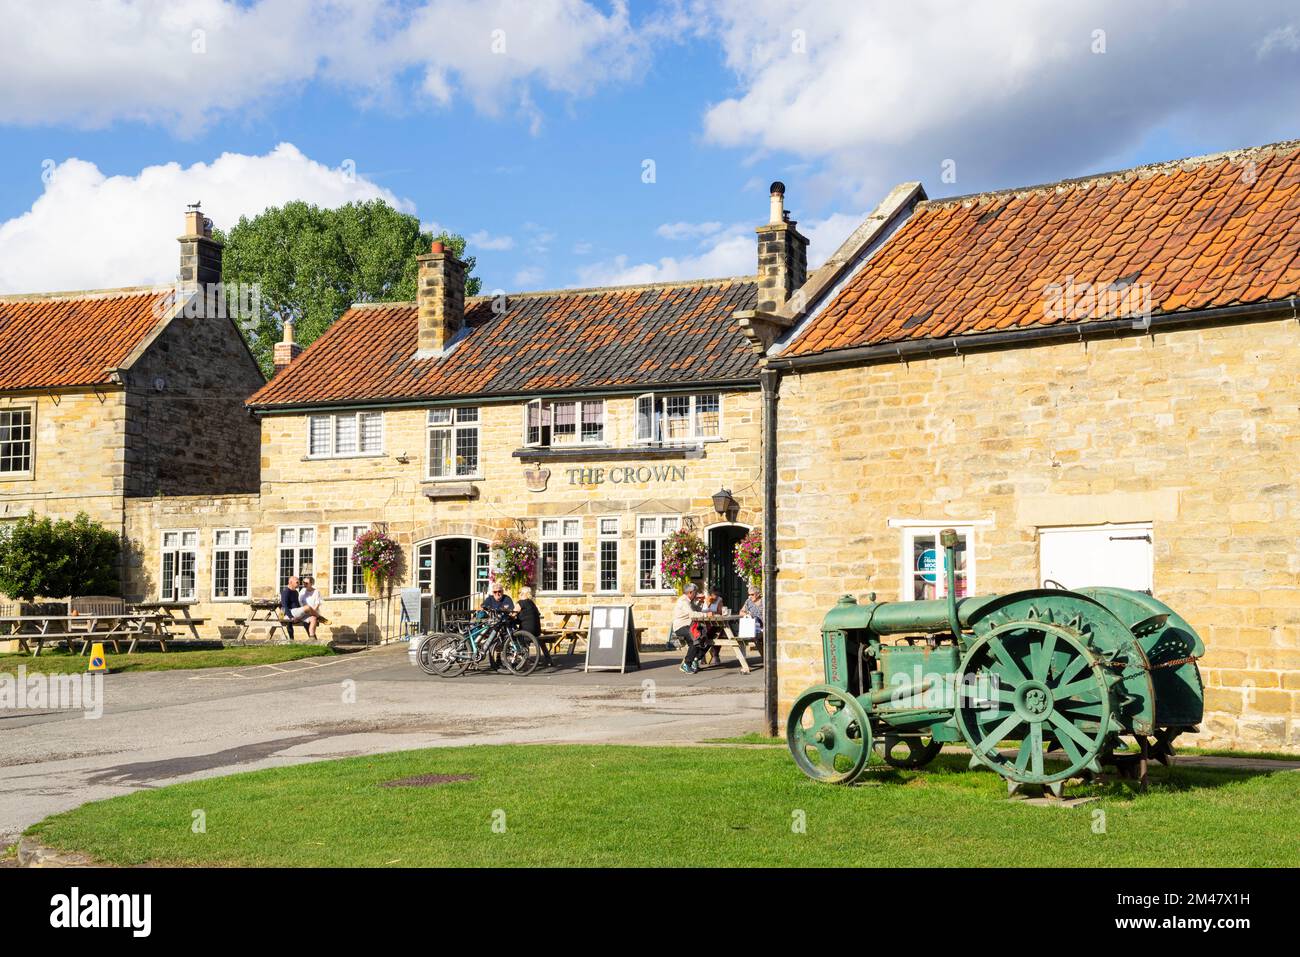 Hutton le Hole North Yorkshire Ryedale Folk Museum with old tractor and the Crown pub in Hutton le Hole North yorkshire England UK GB Europe Stock Photo